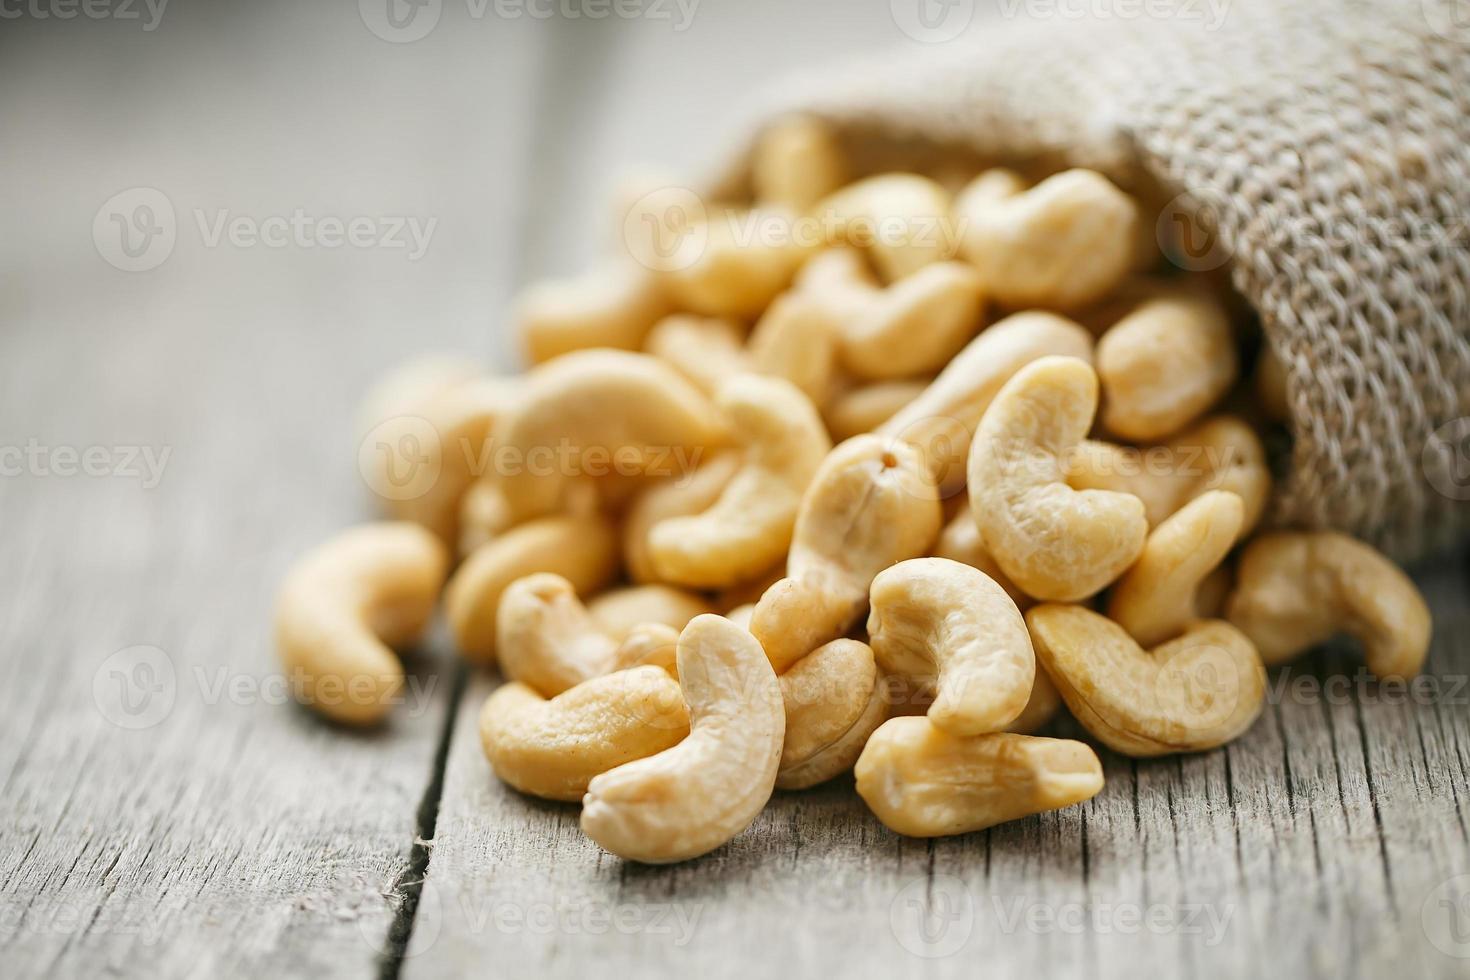 Cashew nuts in burlap bag on wooden gray background . Healthy food photo